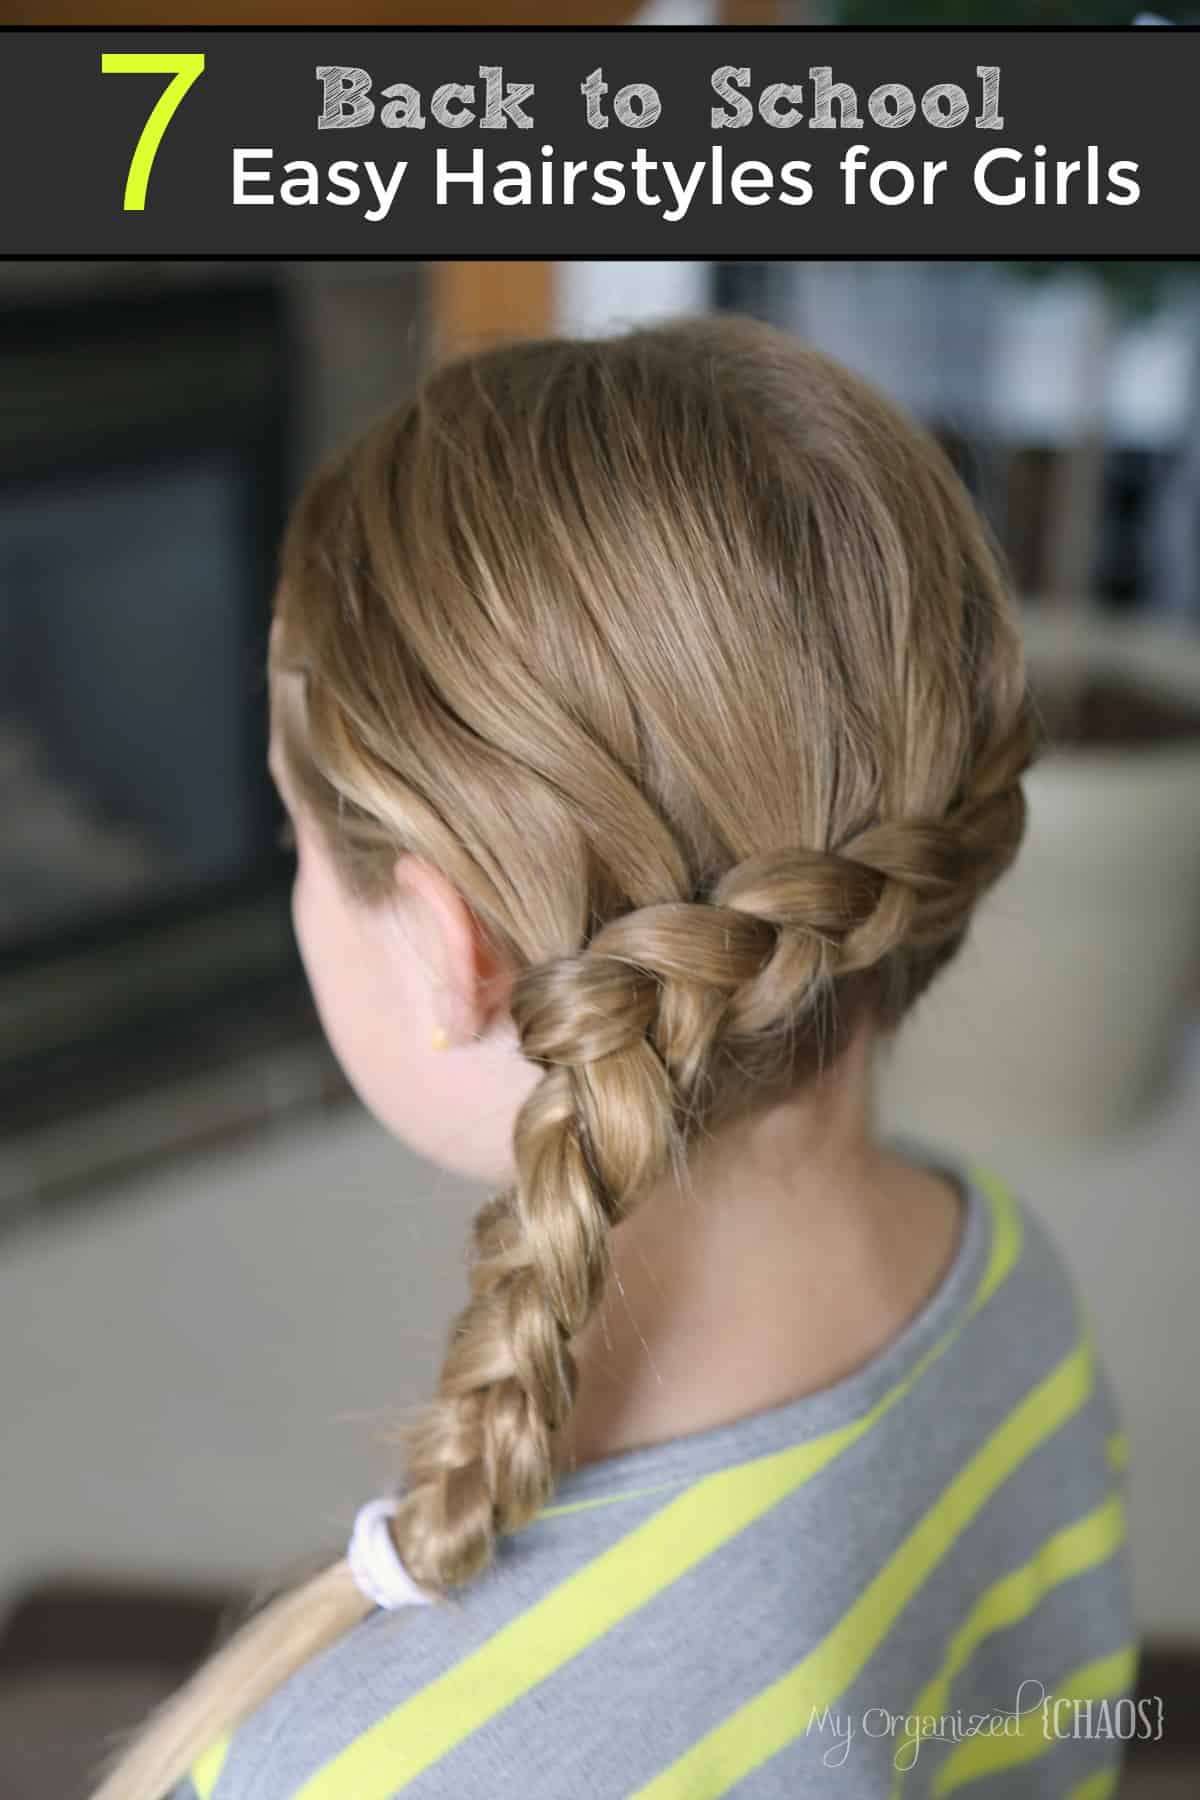 Back to School Easy Hairstyles for Girls